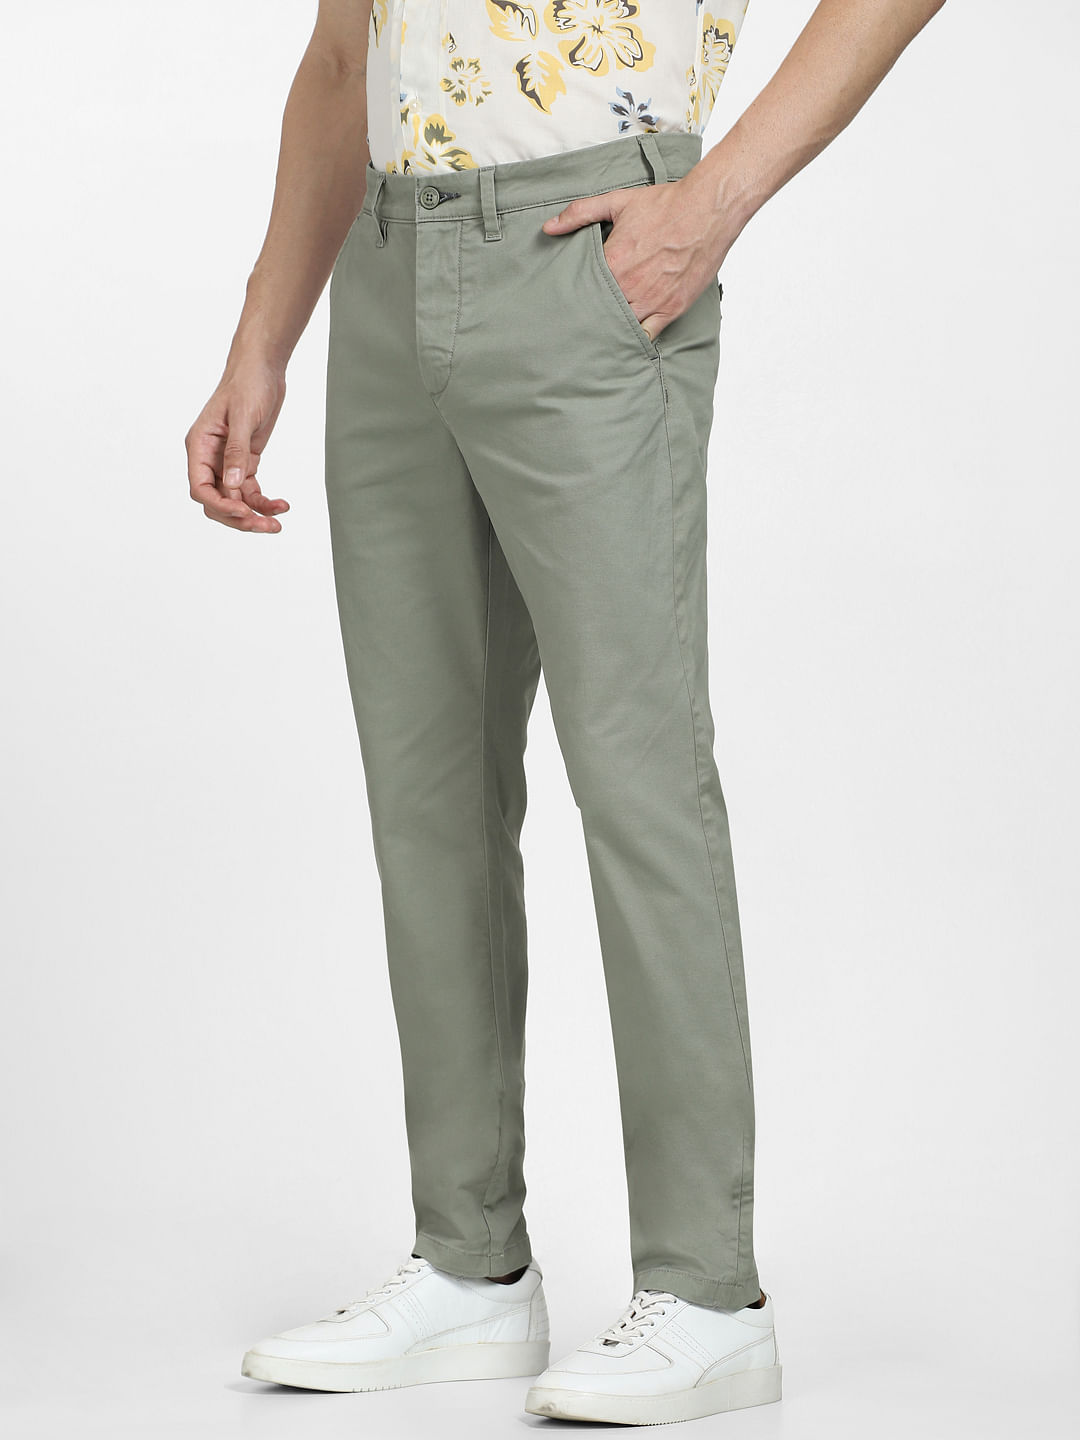 Womens Off-White blue Slim-Fit Corporate Trousers | Harrods UK